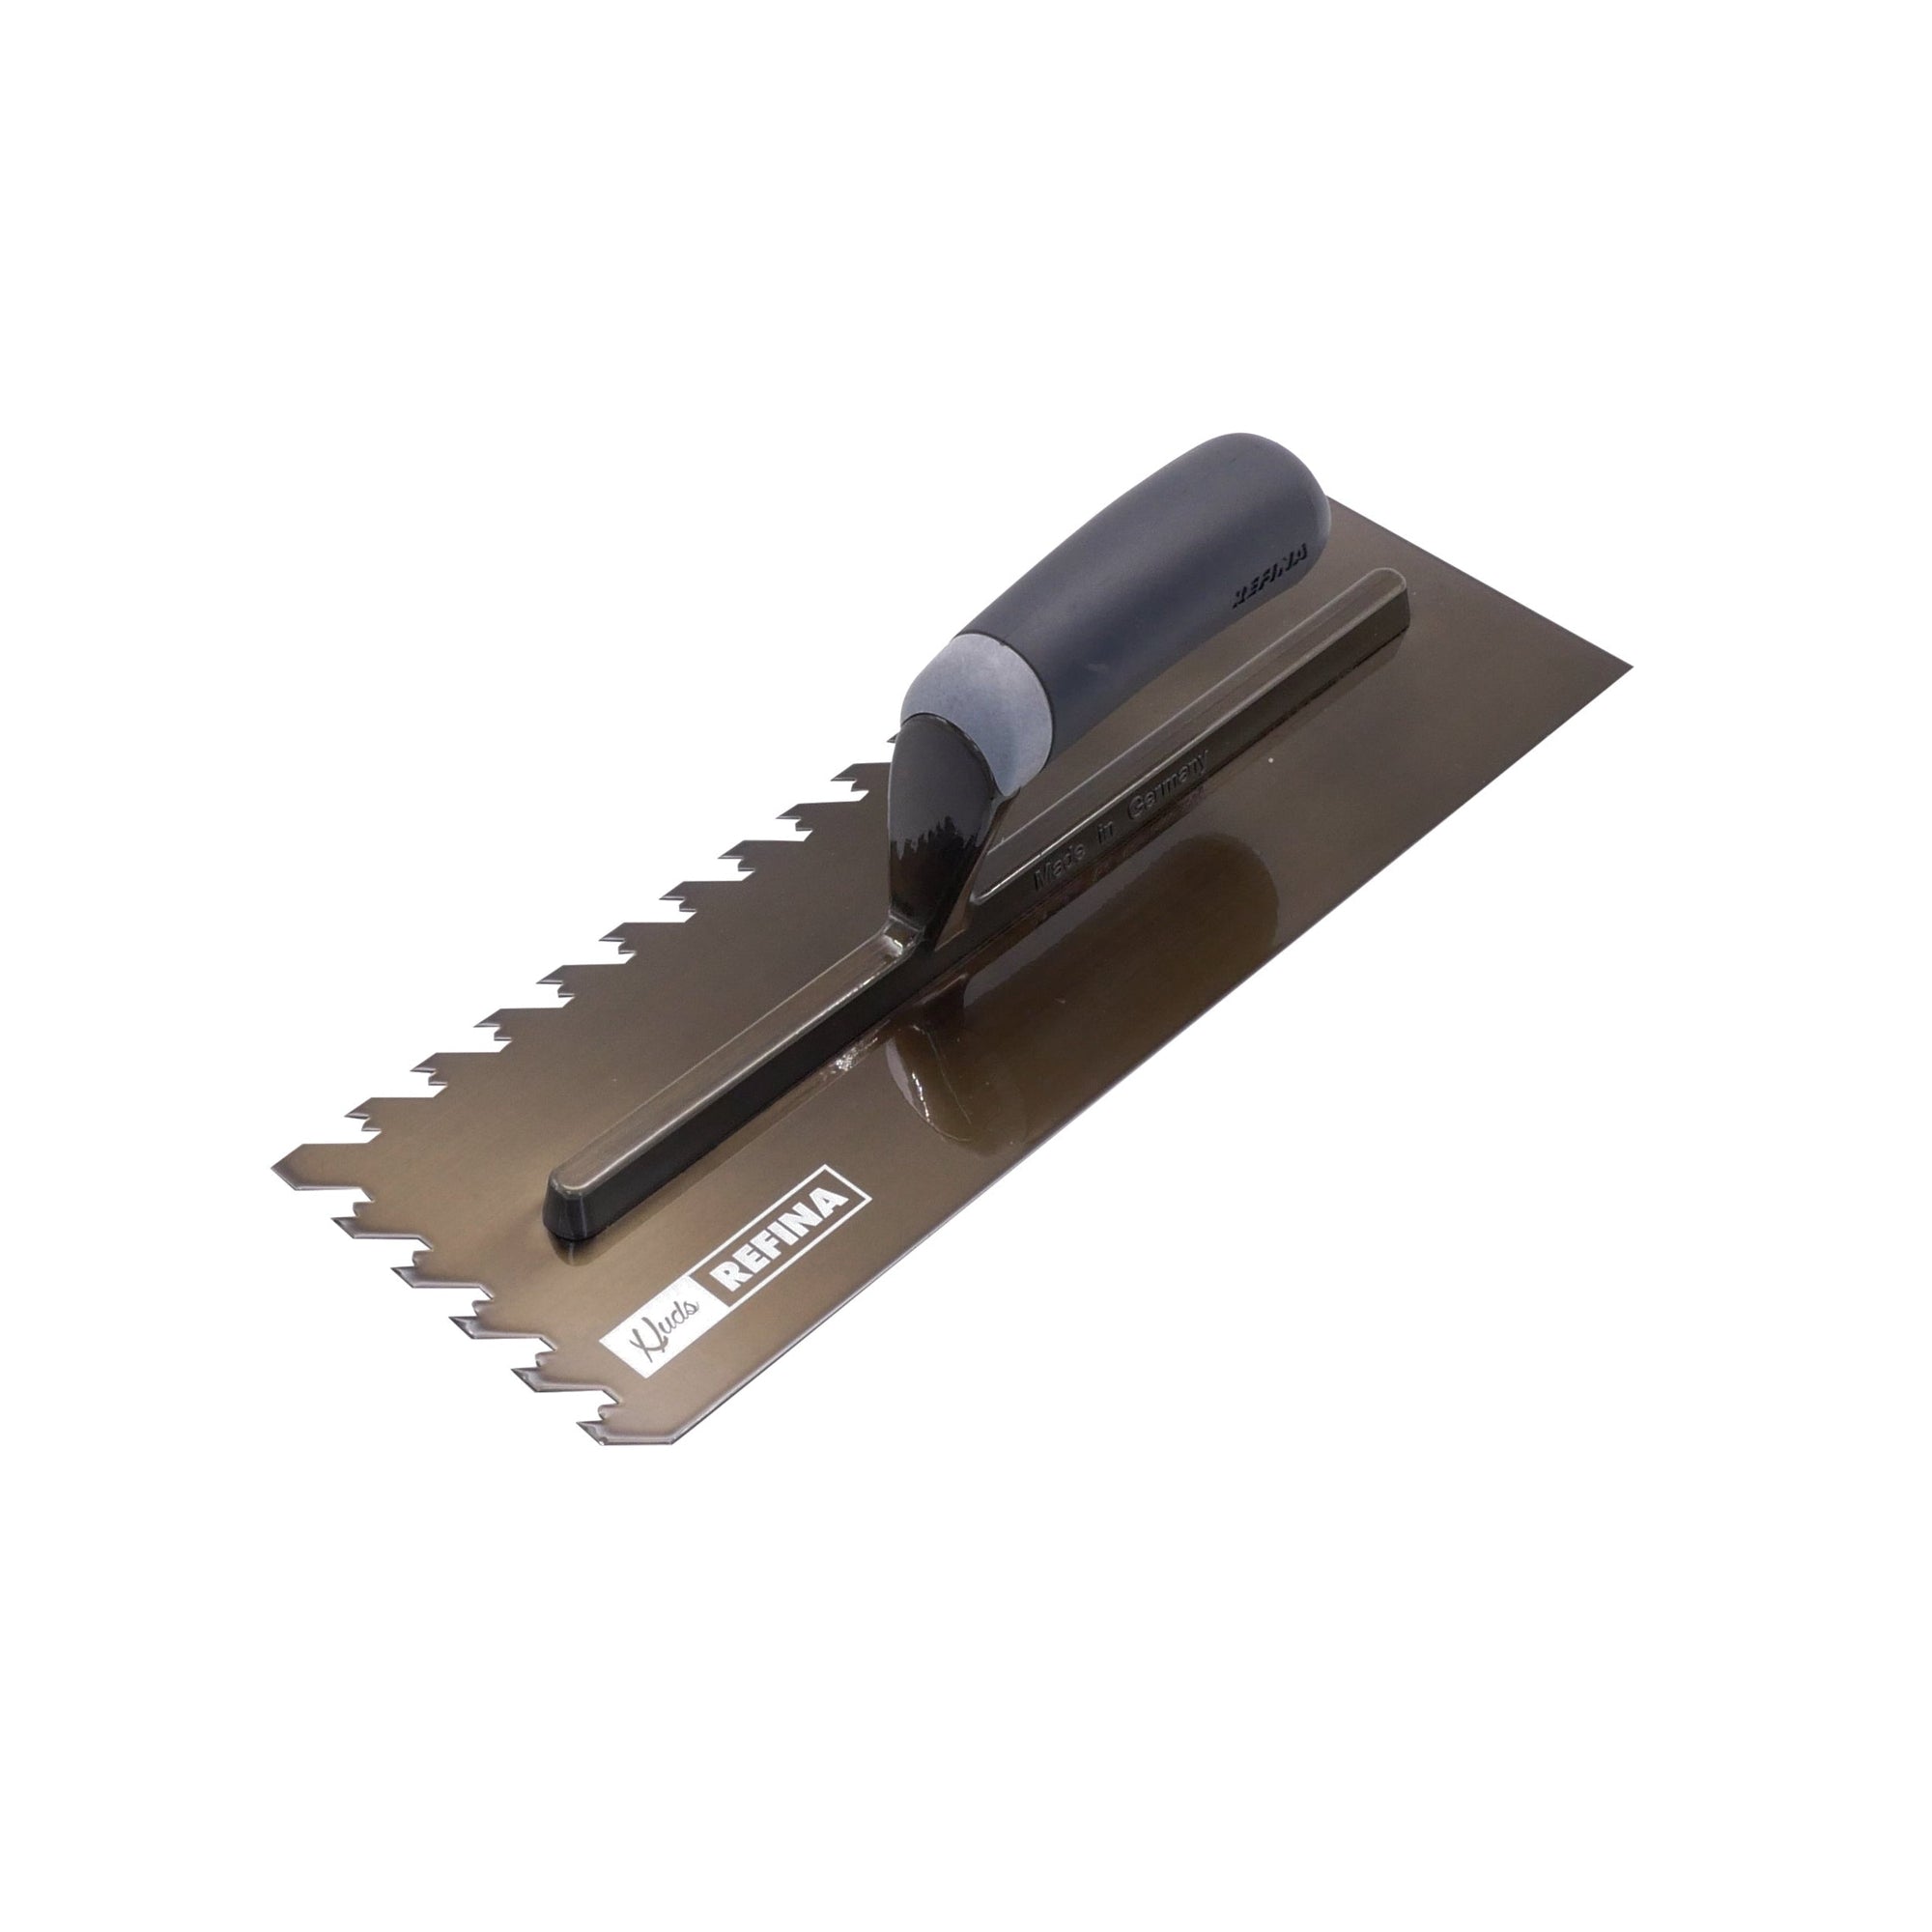 NotchTile 14" XL Trowel 10mm Graphite (Right Hand) - Calidad Tools